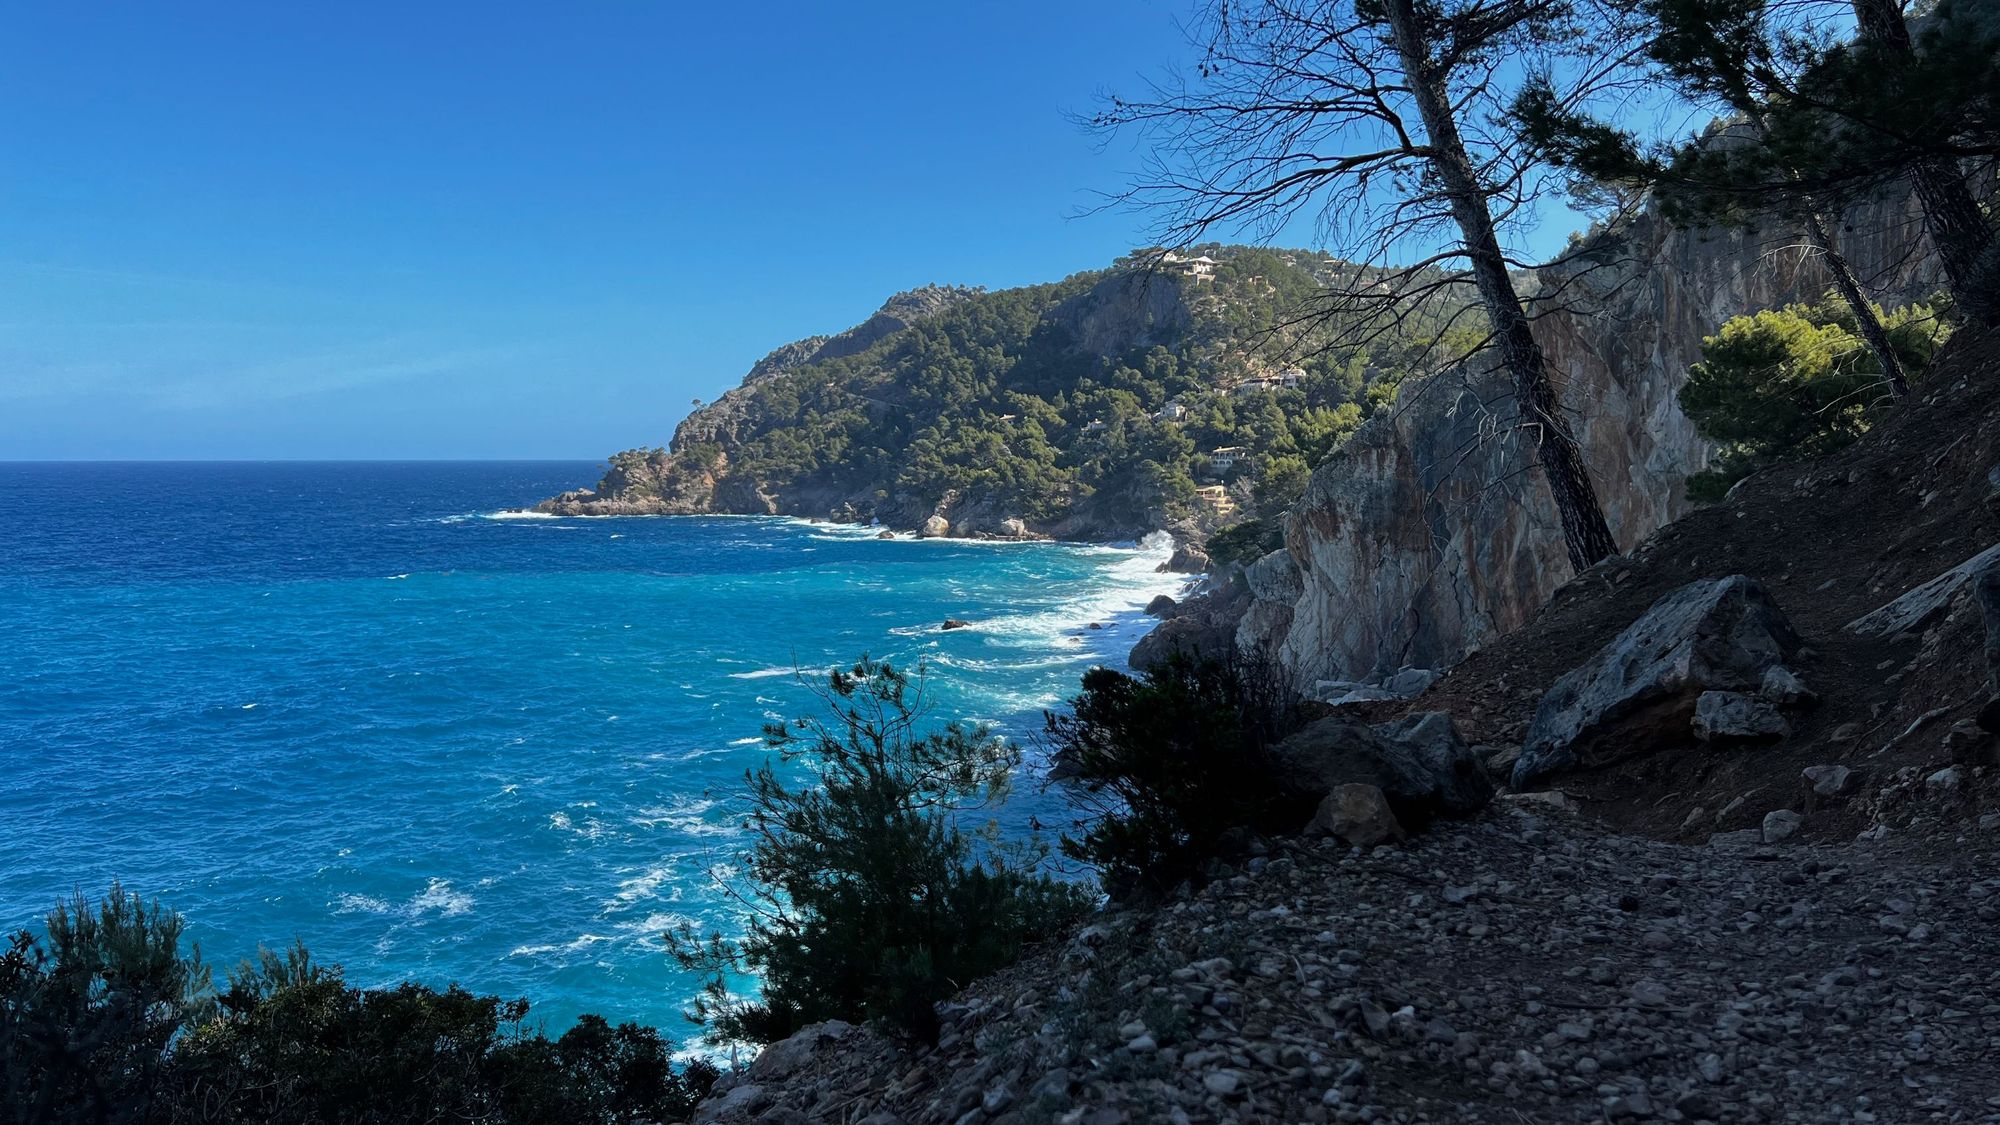 The silent, secretive coves of Mallorca, ideal for wild swimming. Photo: José Miguel Real